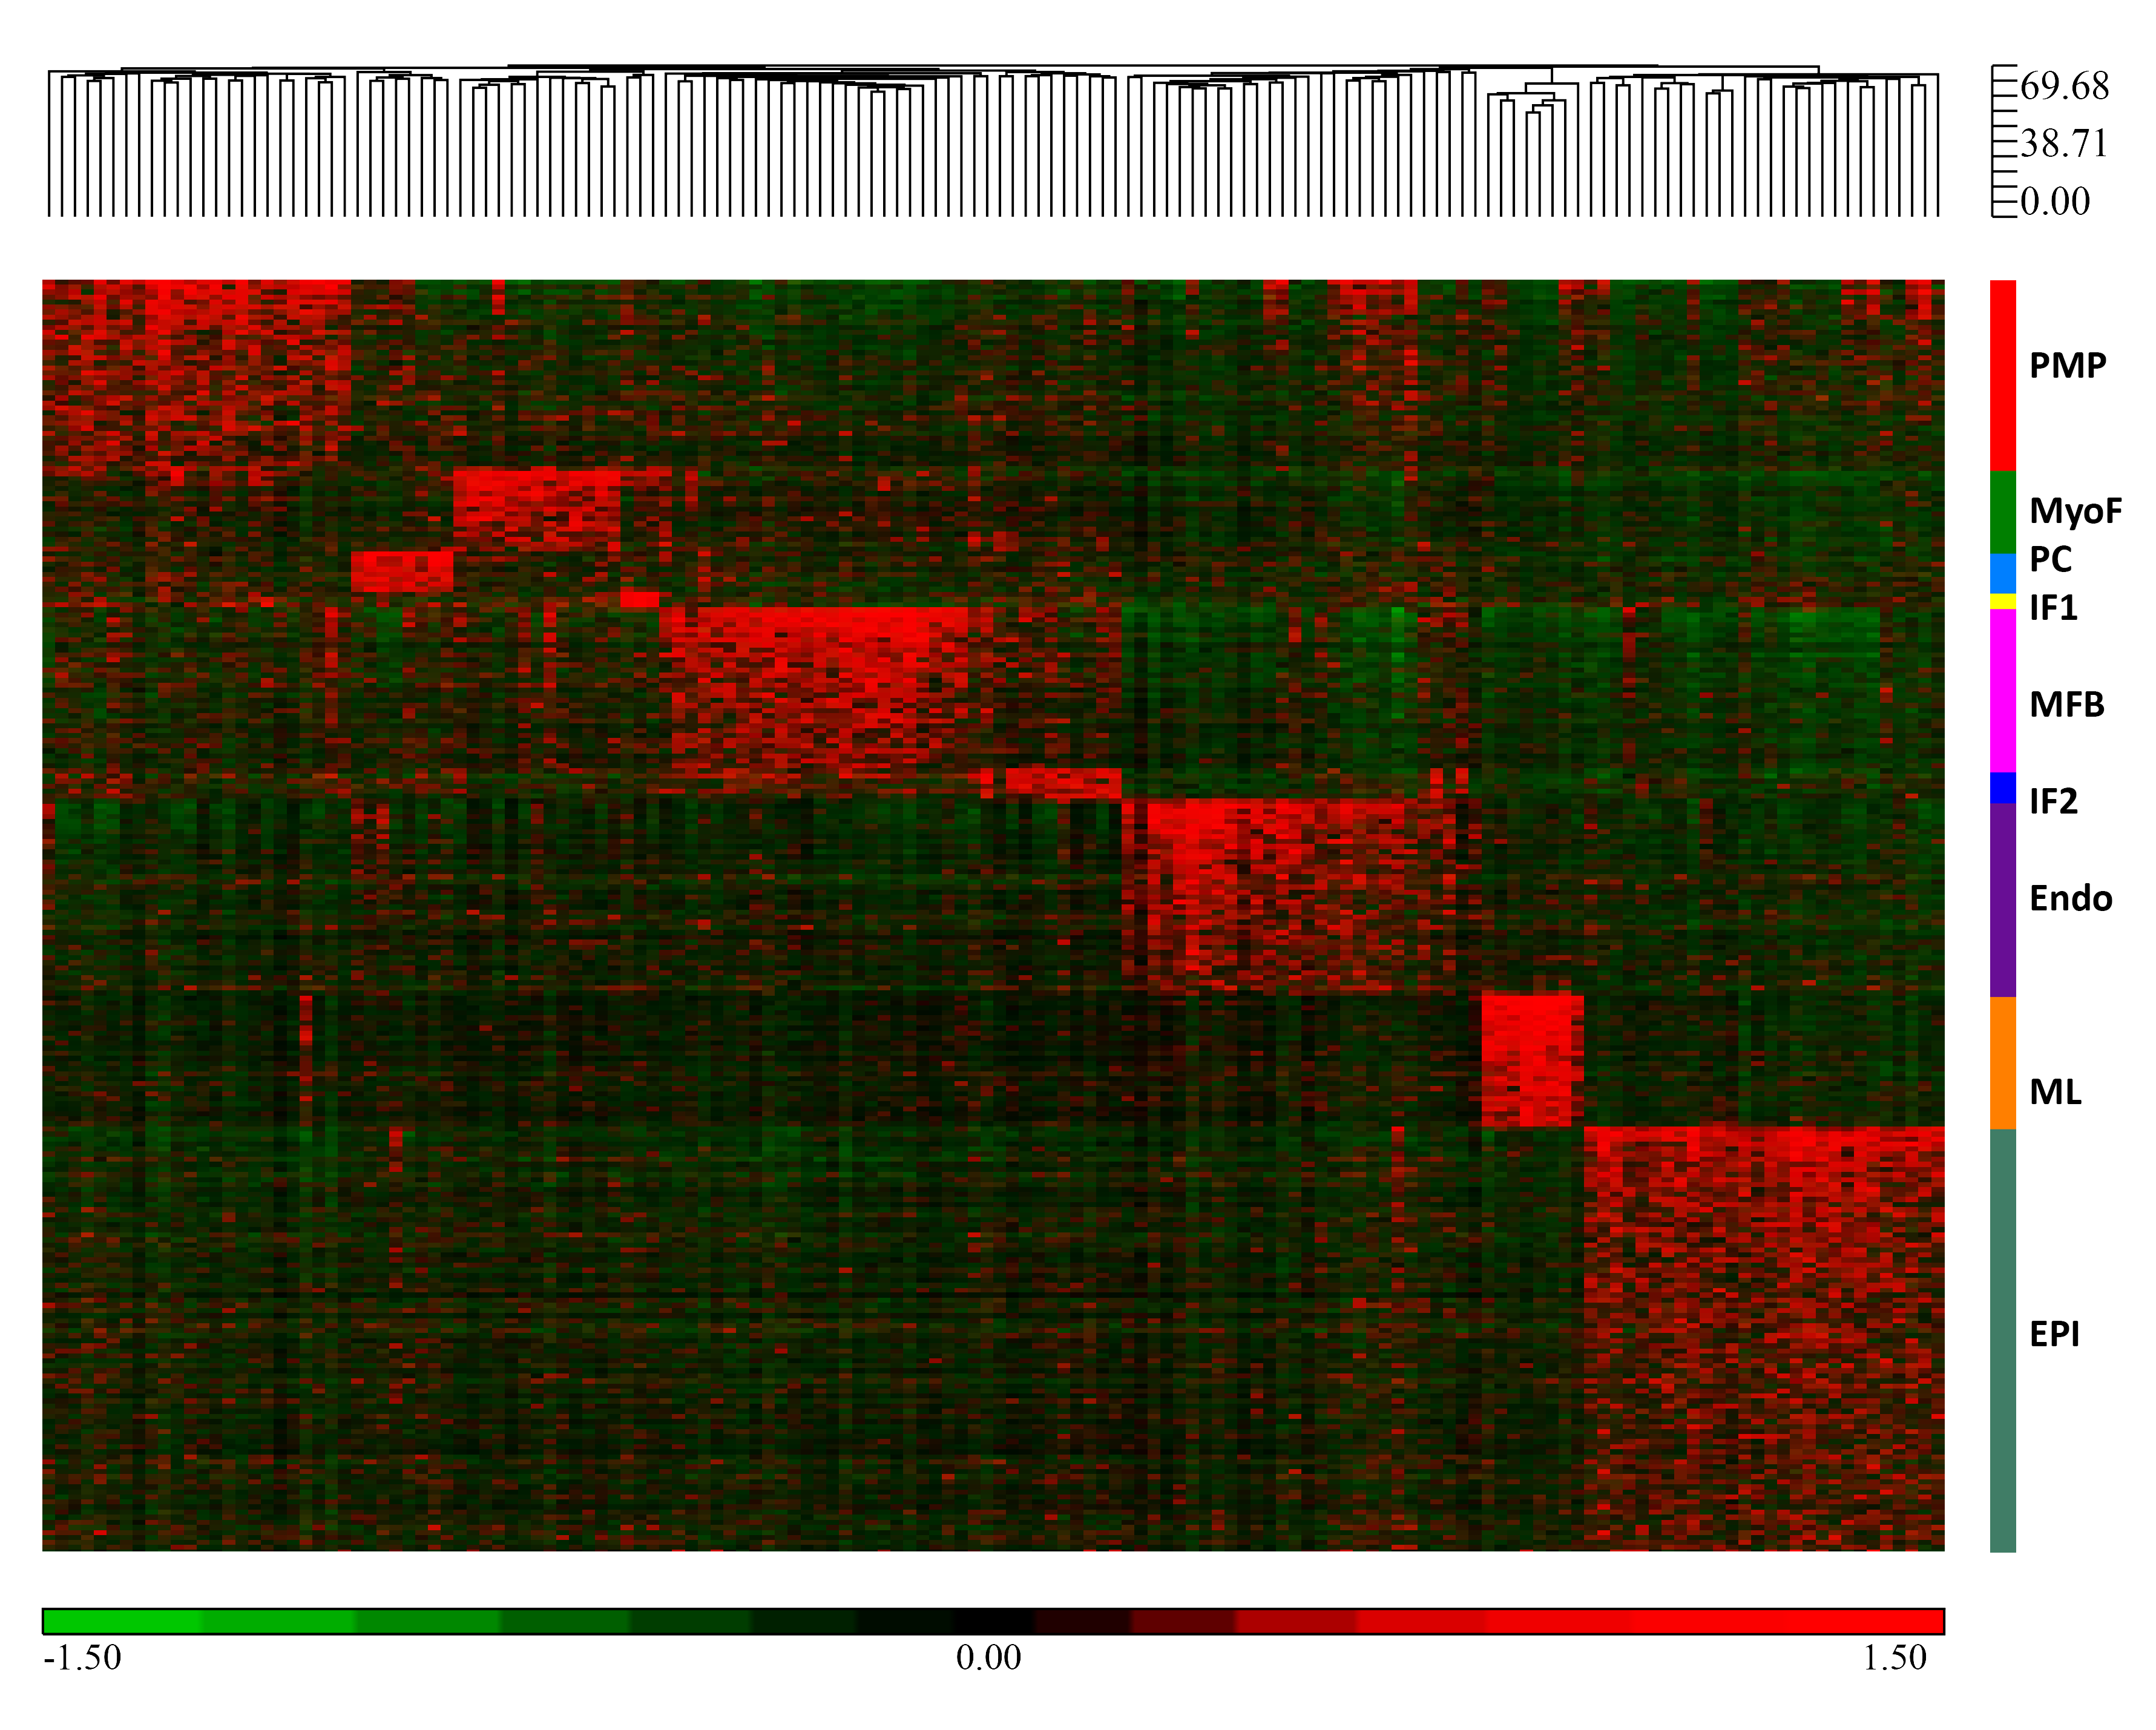 9 cell type signatures' Heatmap